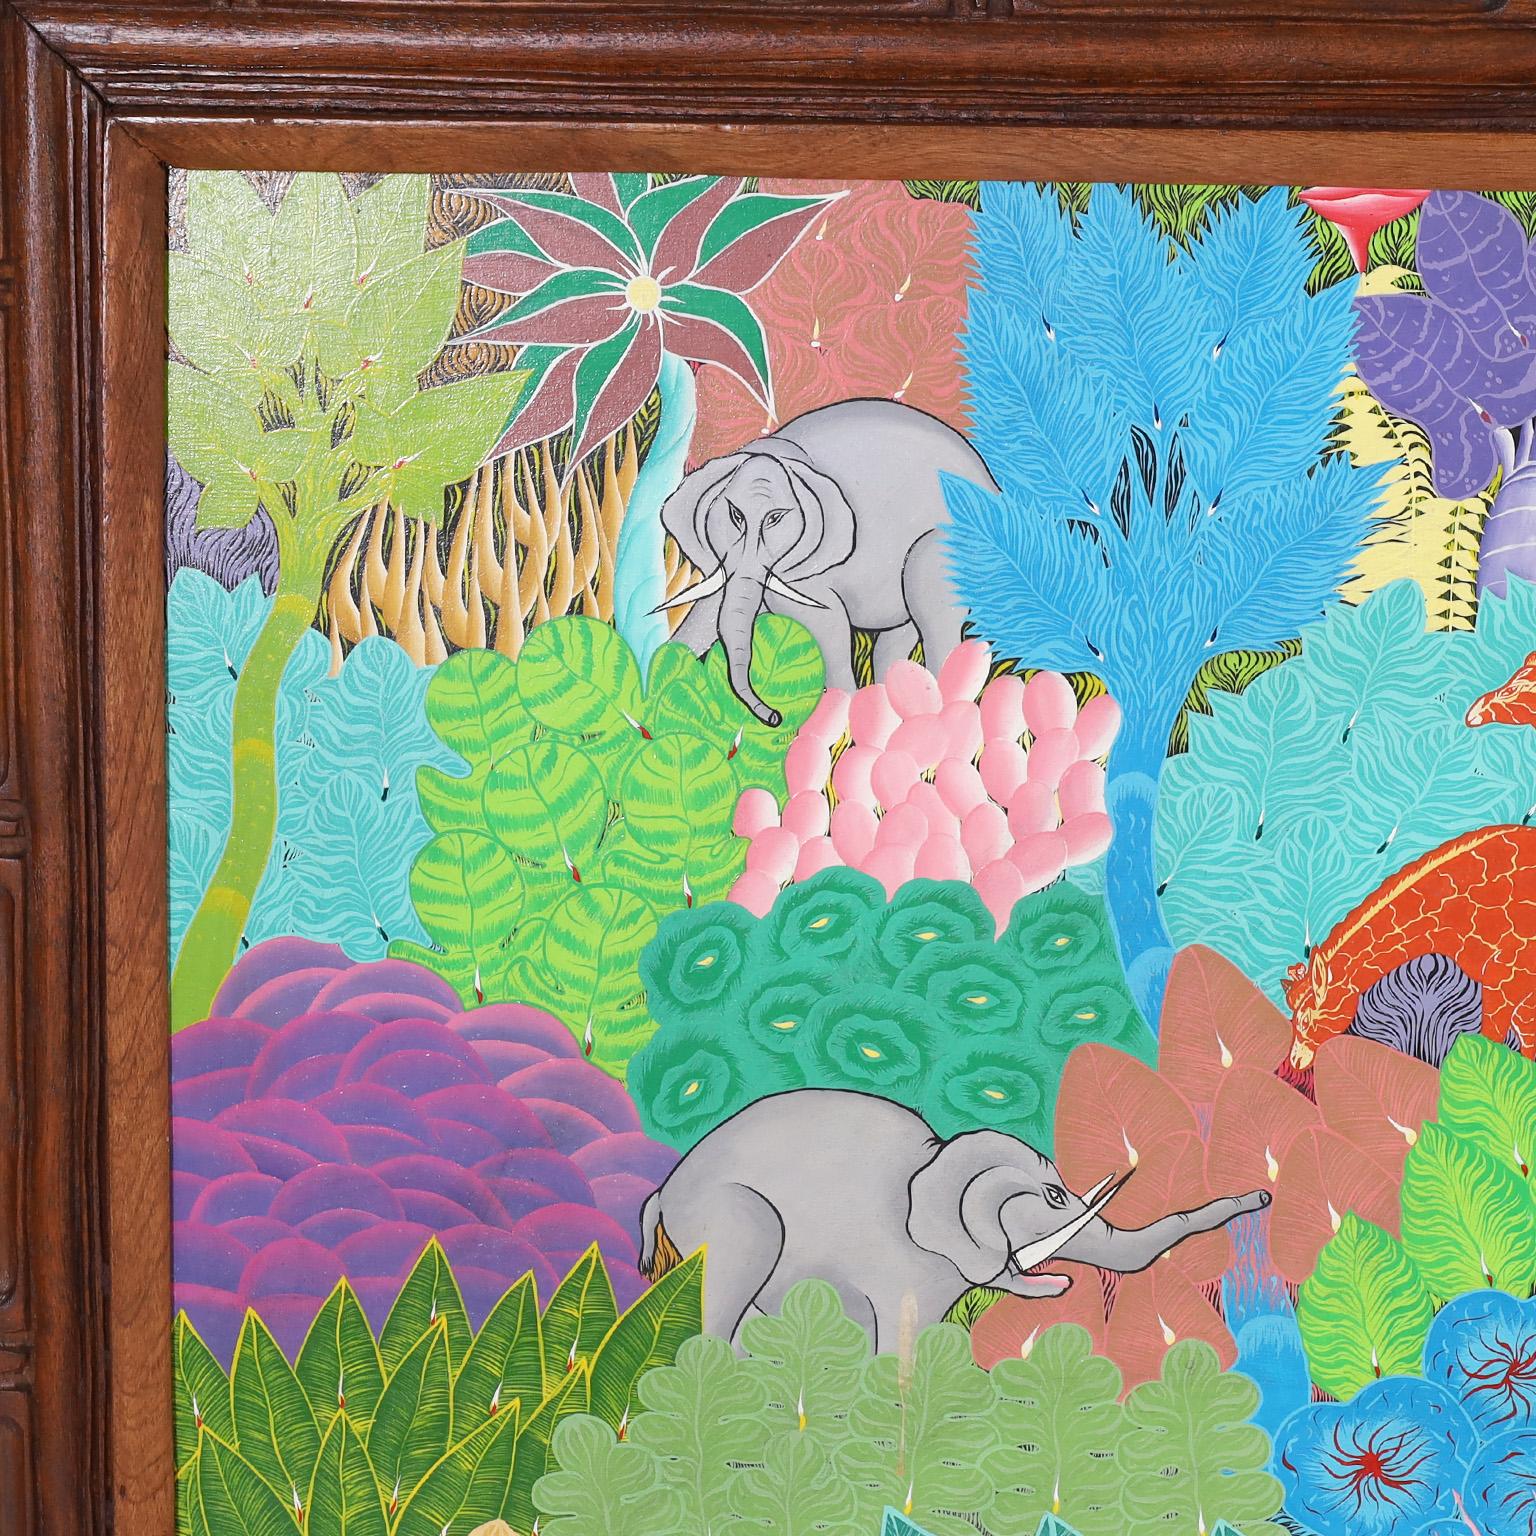 Striking vintage Haitian acrylic painting on canvas of African animals in a jungle setting executed in a distinctive naive style. Signed by noted artist Eustache Loubert and presented in the original mahogany frame.